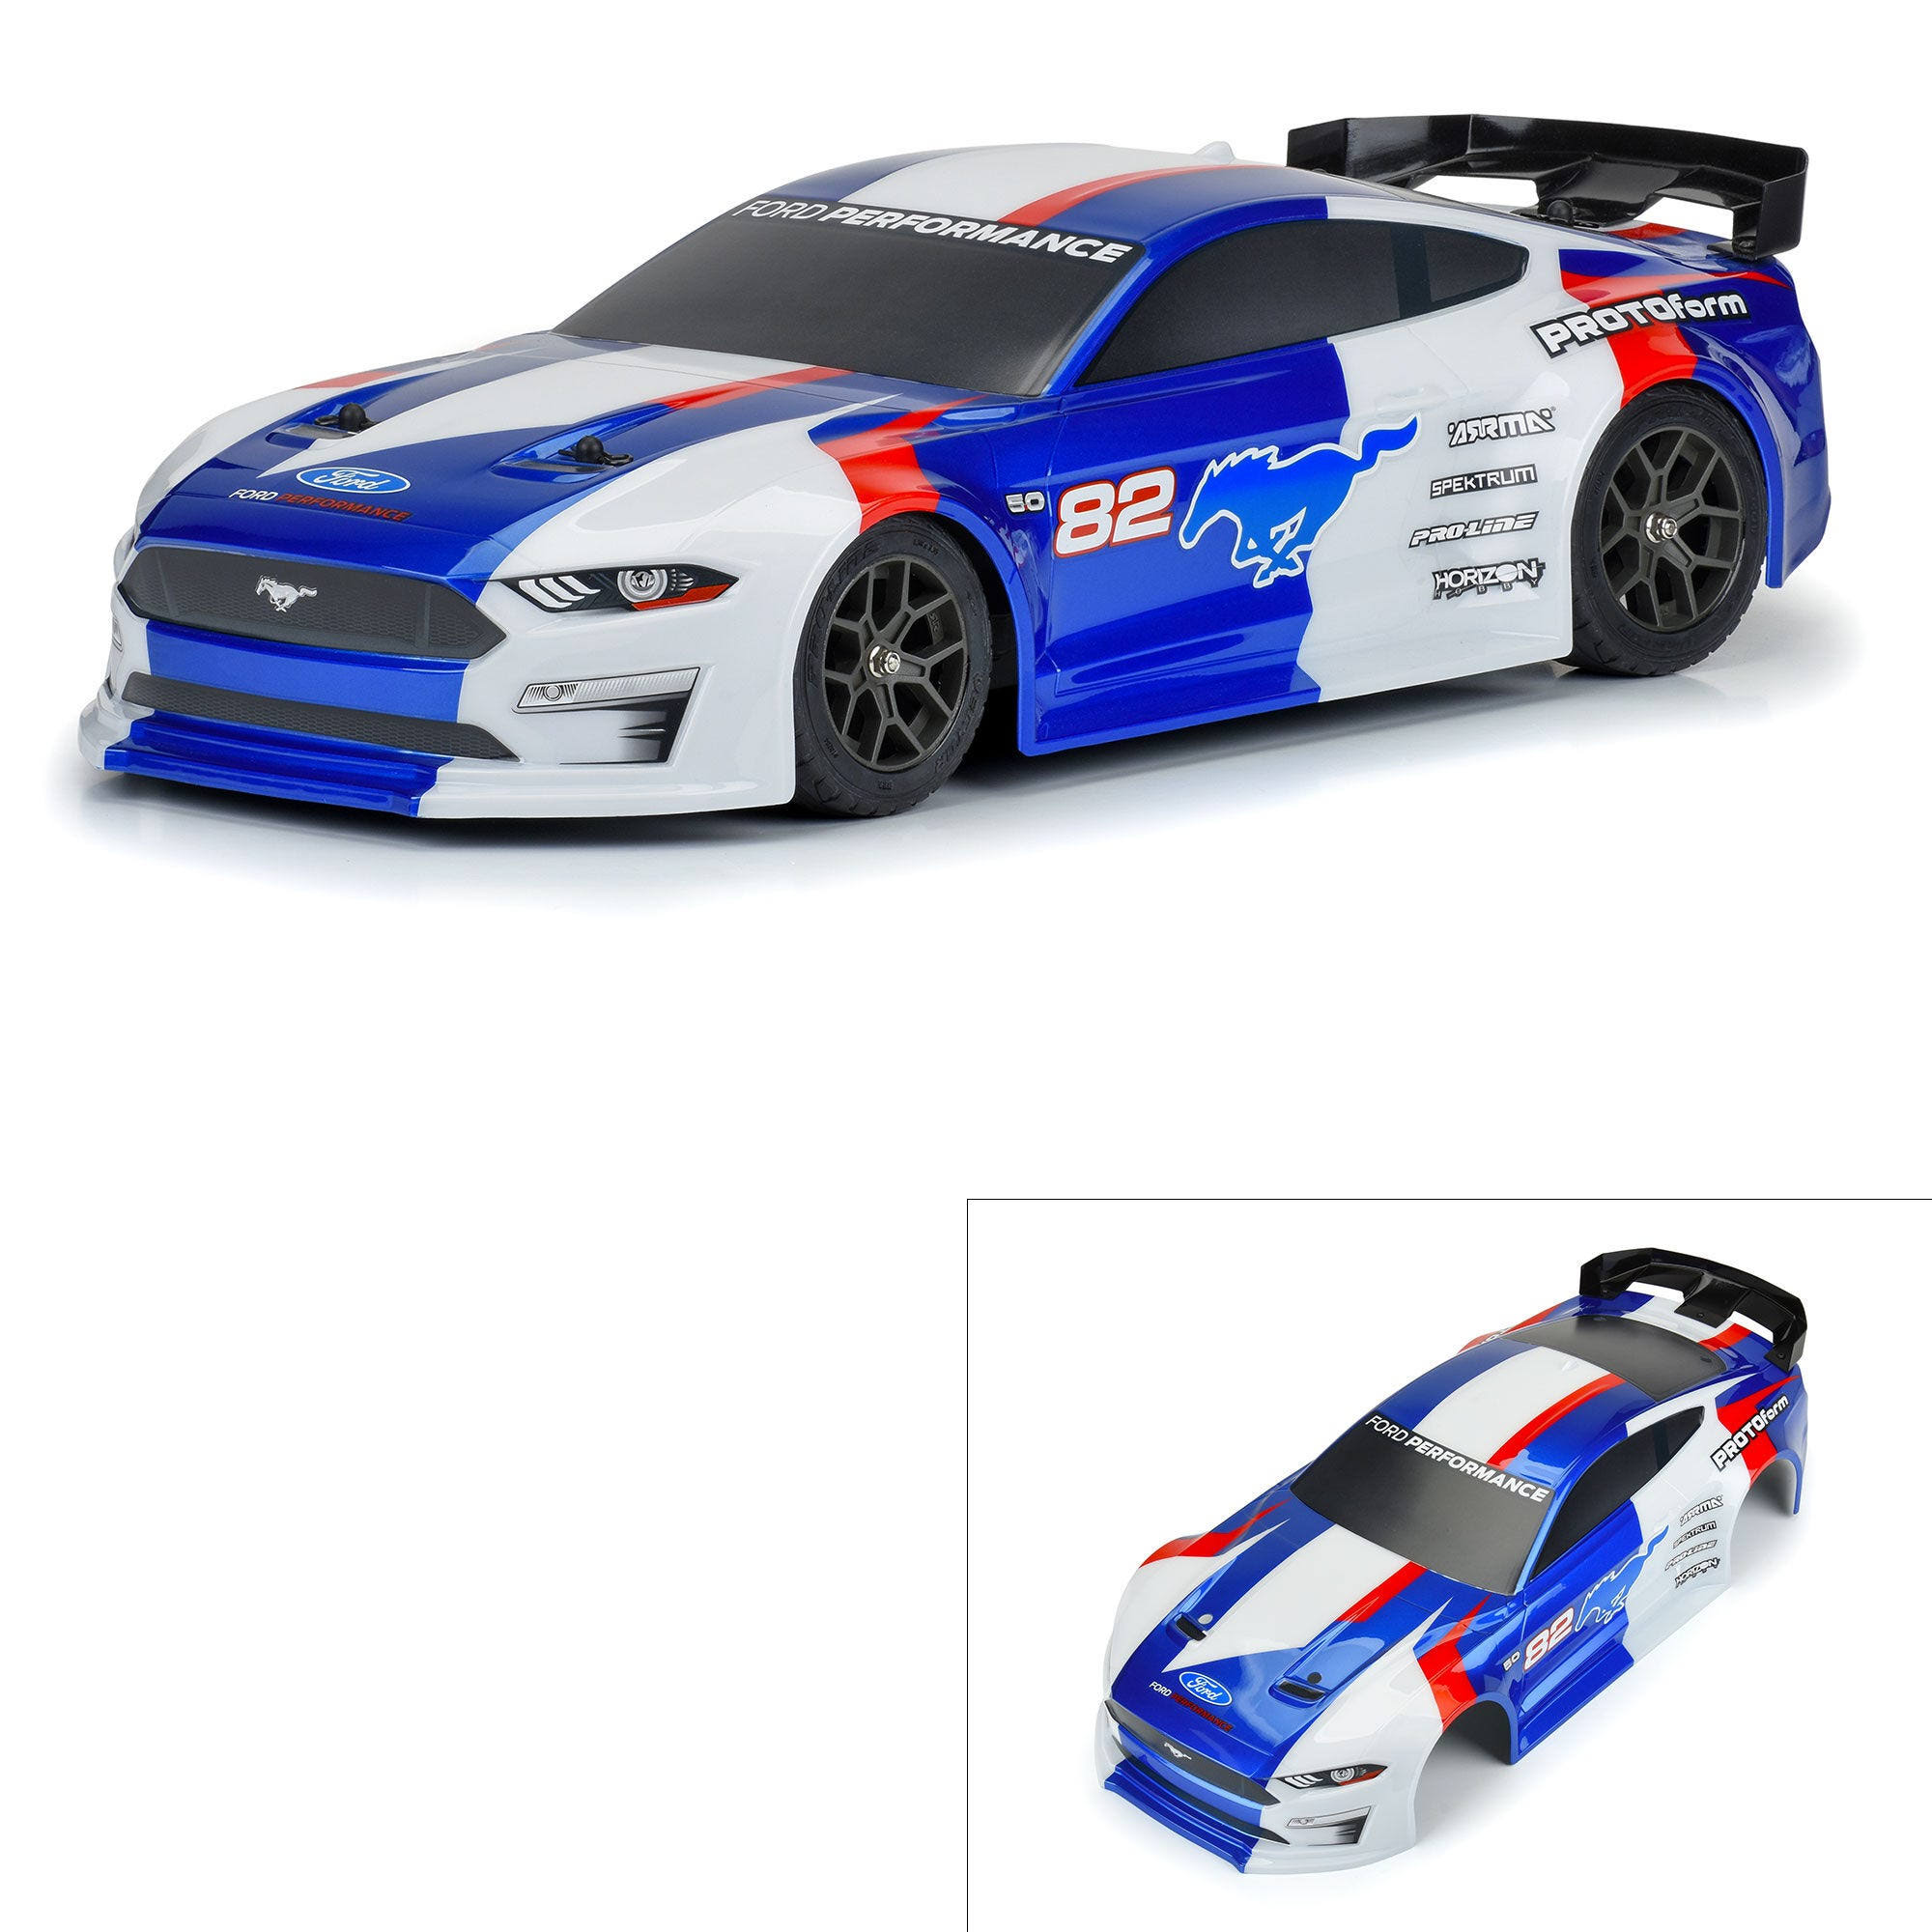 Protoform 18 2021 Ford Mustang Painted Body Blue Vendetta Infraction